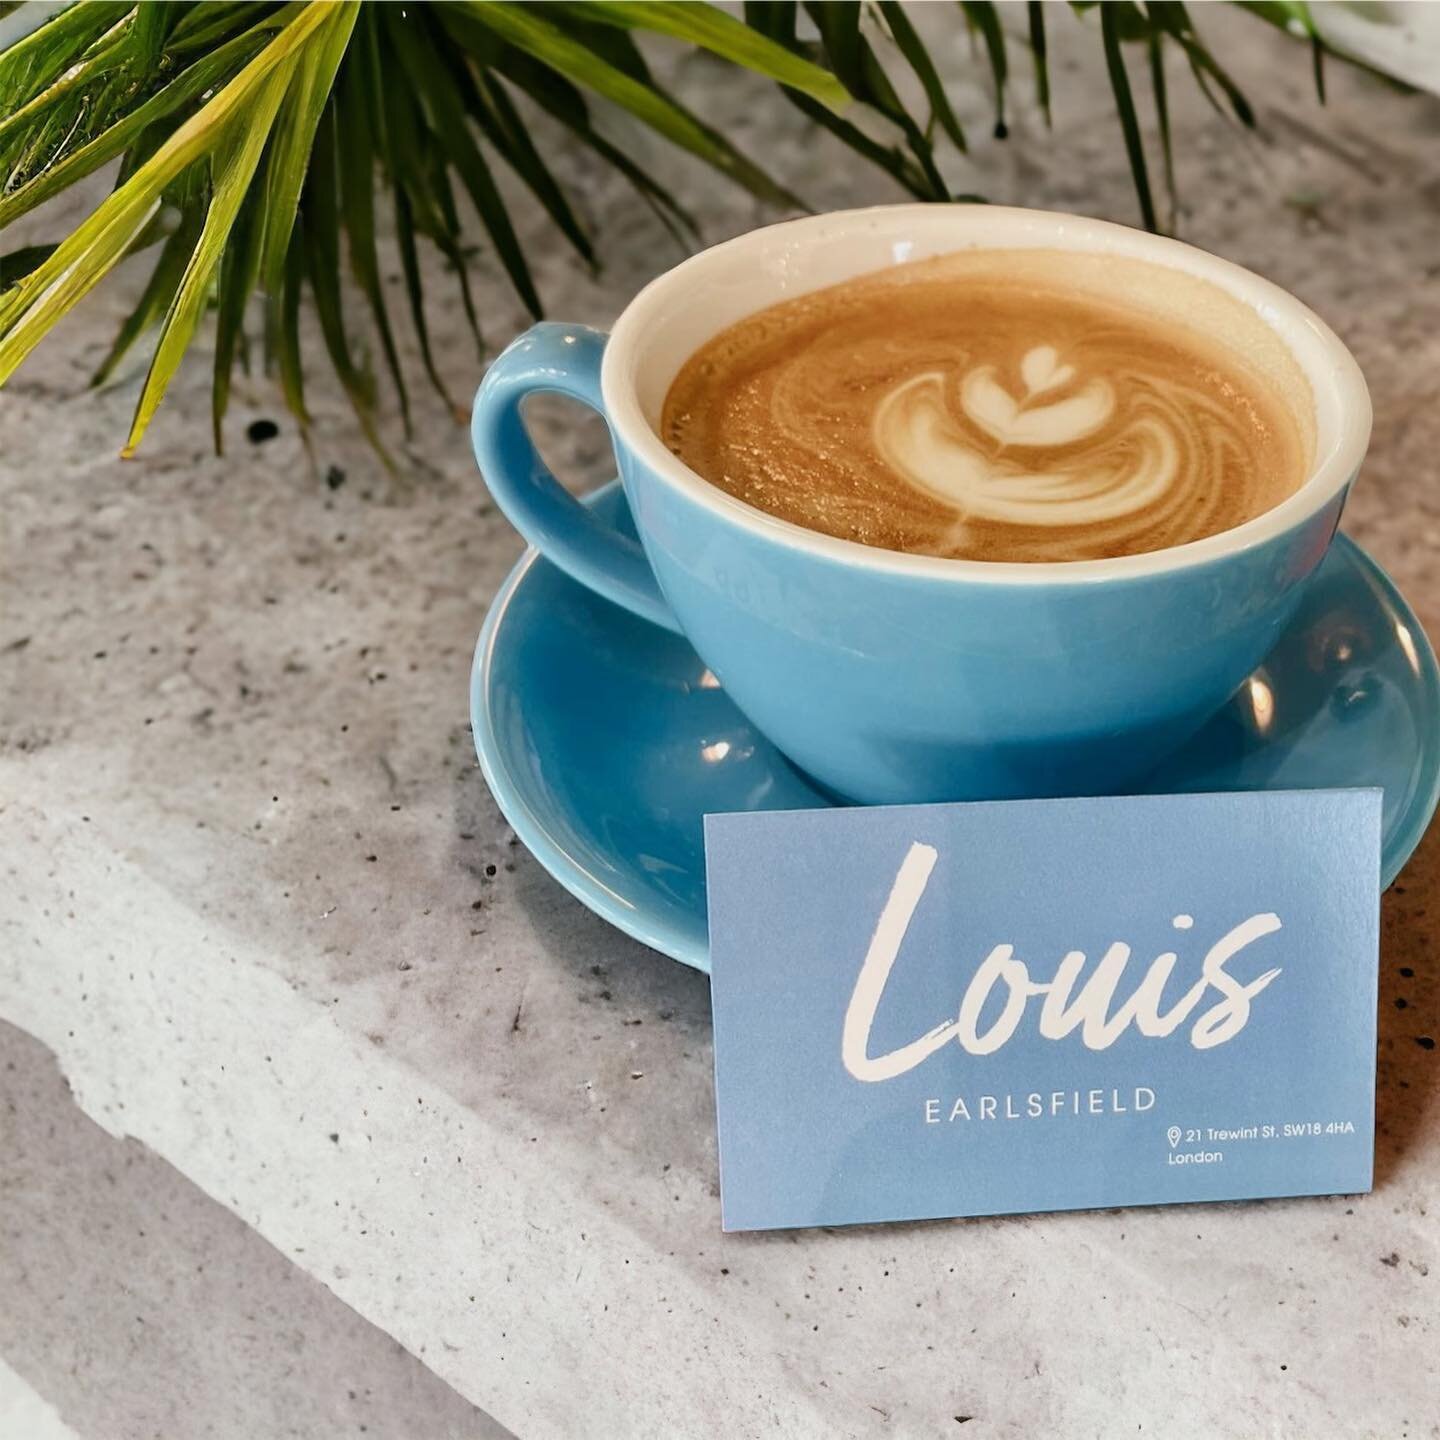 Free coffee this 1st week! ☕️ But what is that we are serving!? 

We want to share what our Louis coffee is actually made of! It is 60% Arabica, 40% Robusta blend. It boasts a full body and low acidity, being a great choice for an everyday espresso, 